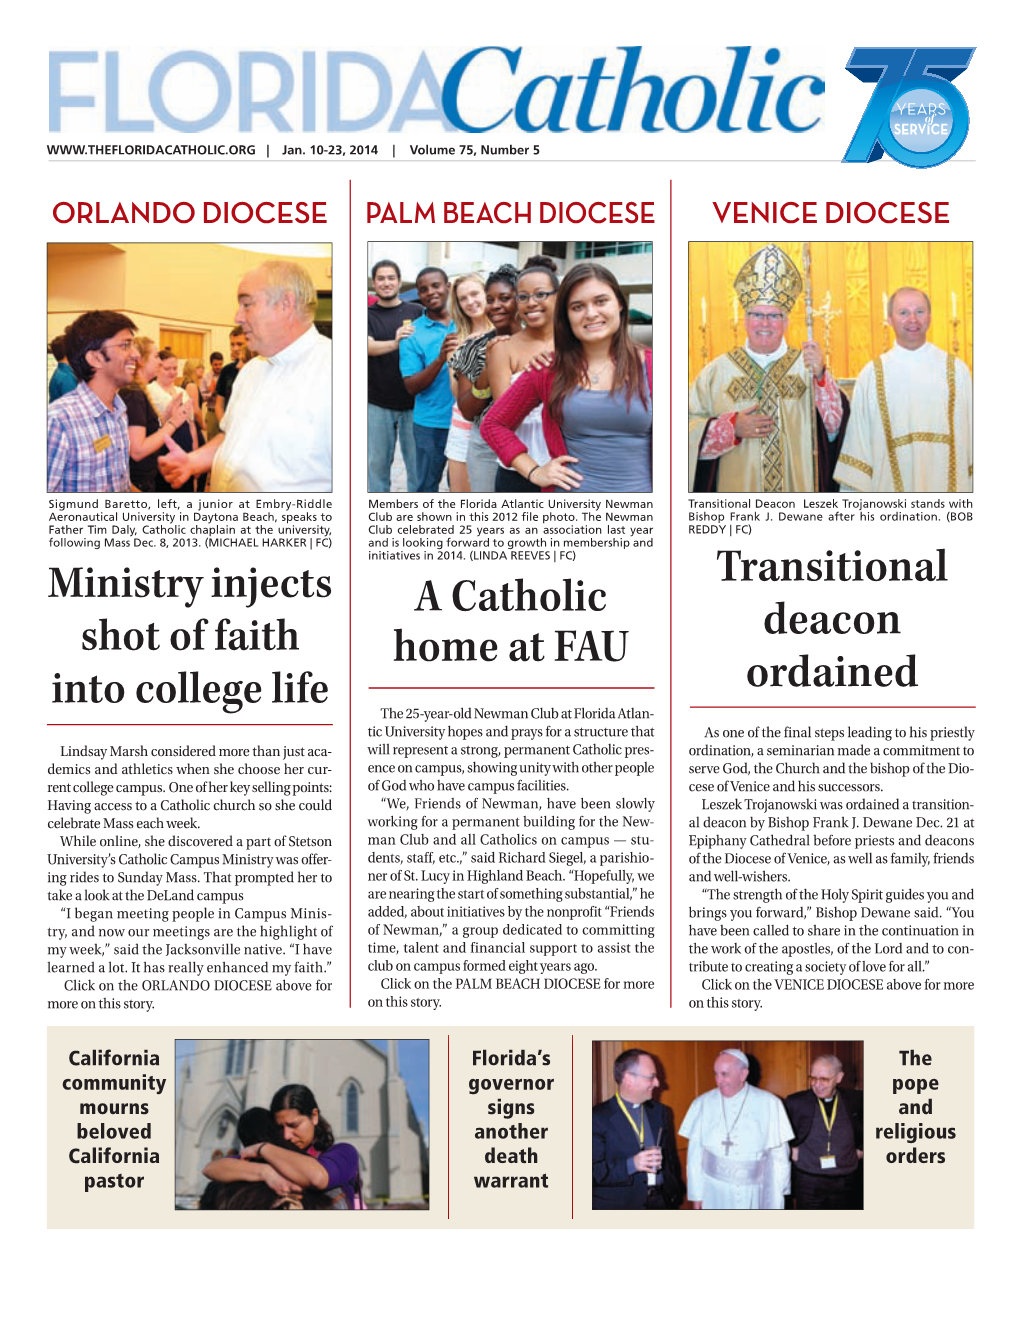 A Catholic Home at FAU Transitional Deacon Ordained